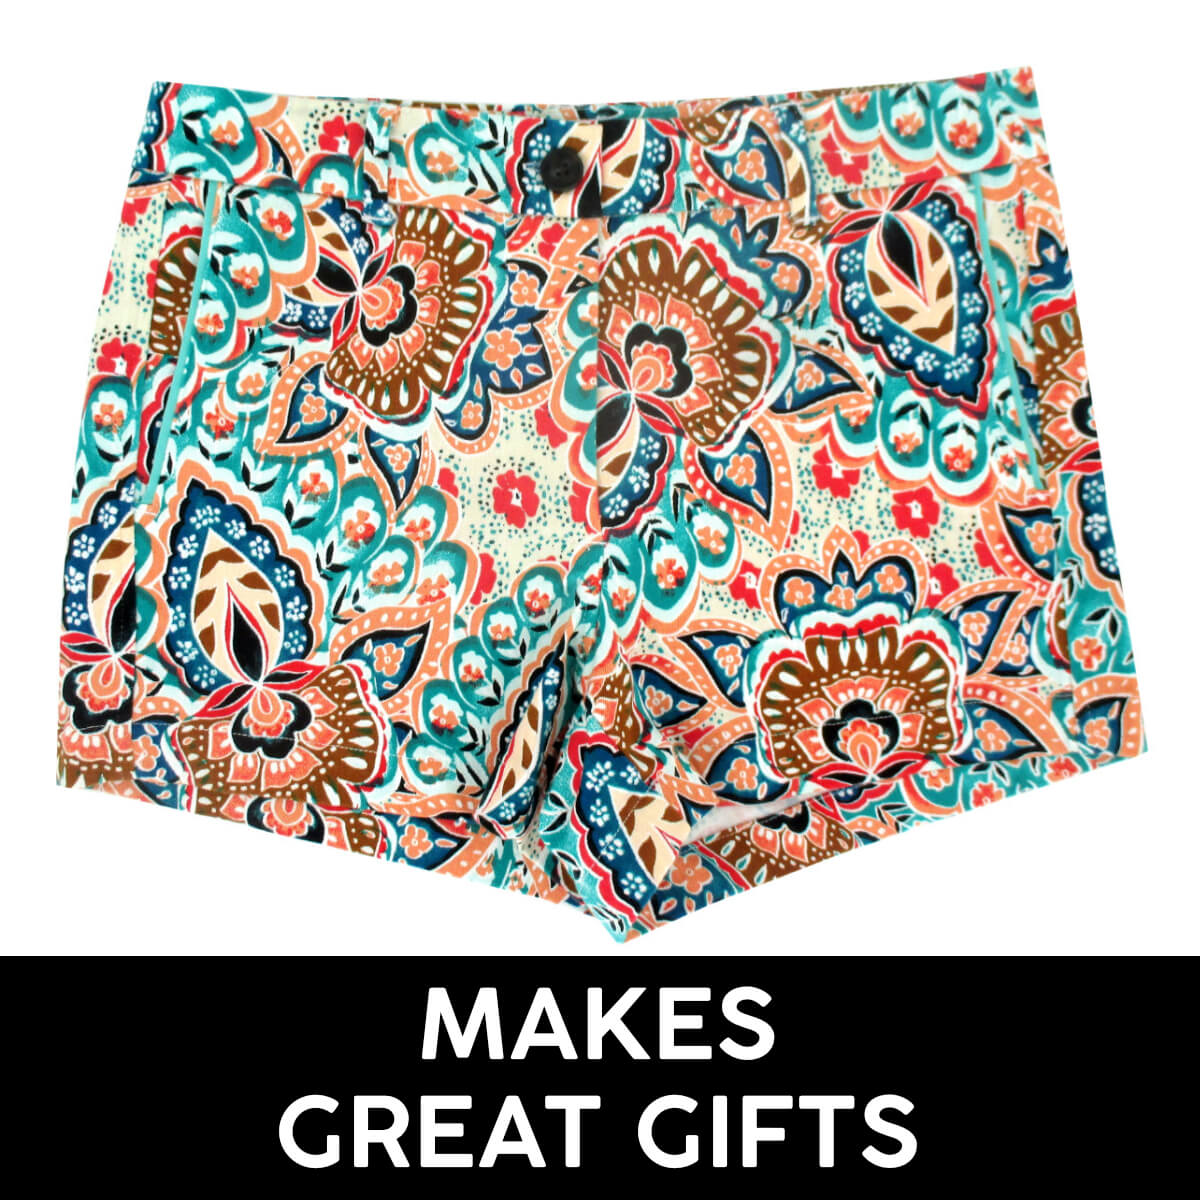 Gifts for Her! Shop Unique Statement Print Shorts for The Special Lady In Your Life! Shorts with Personality!